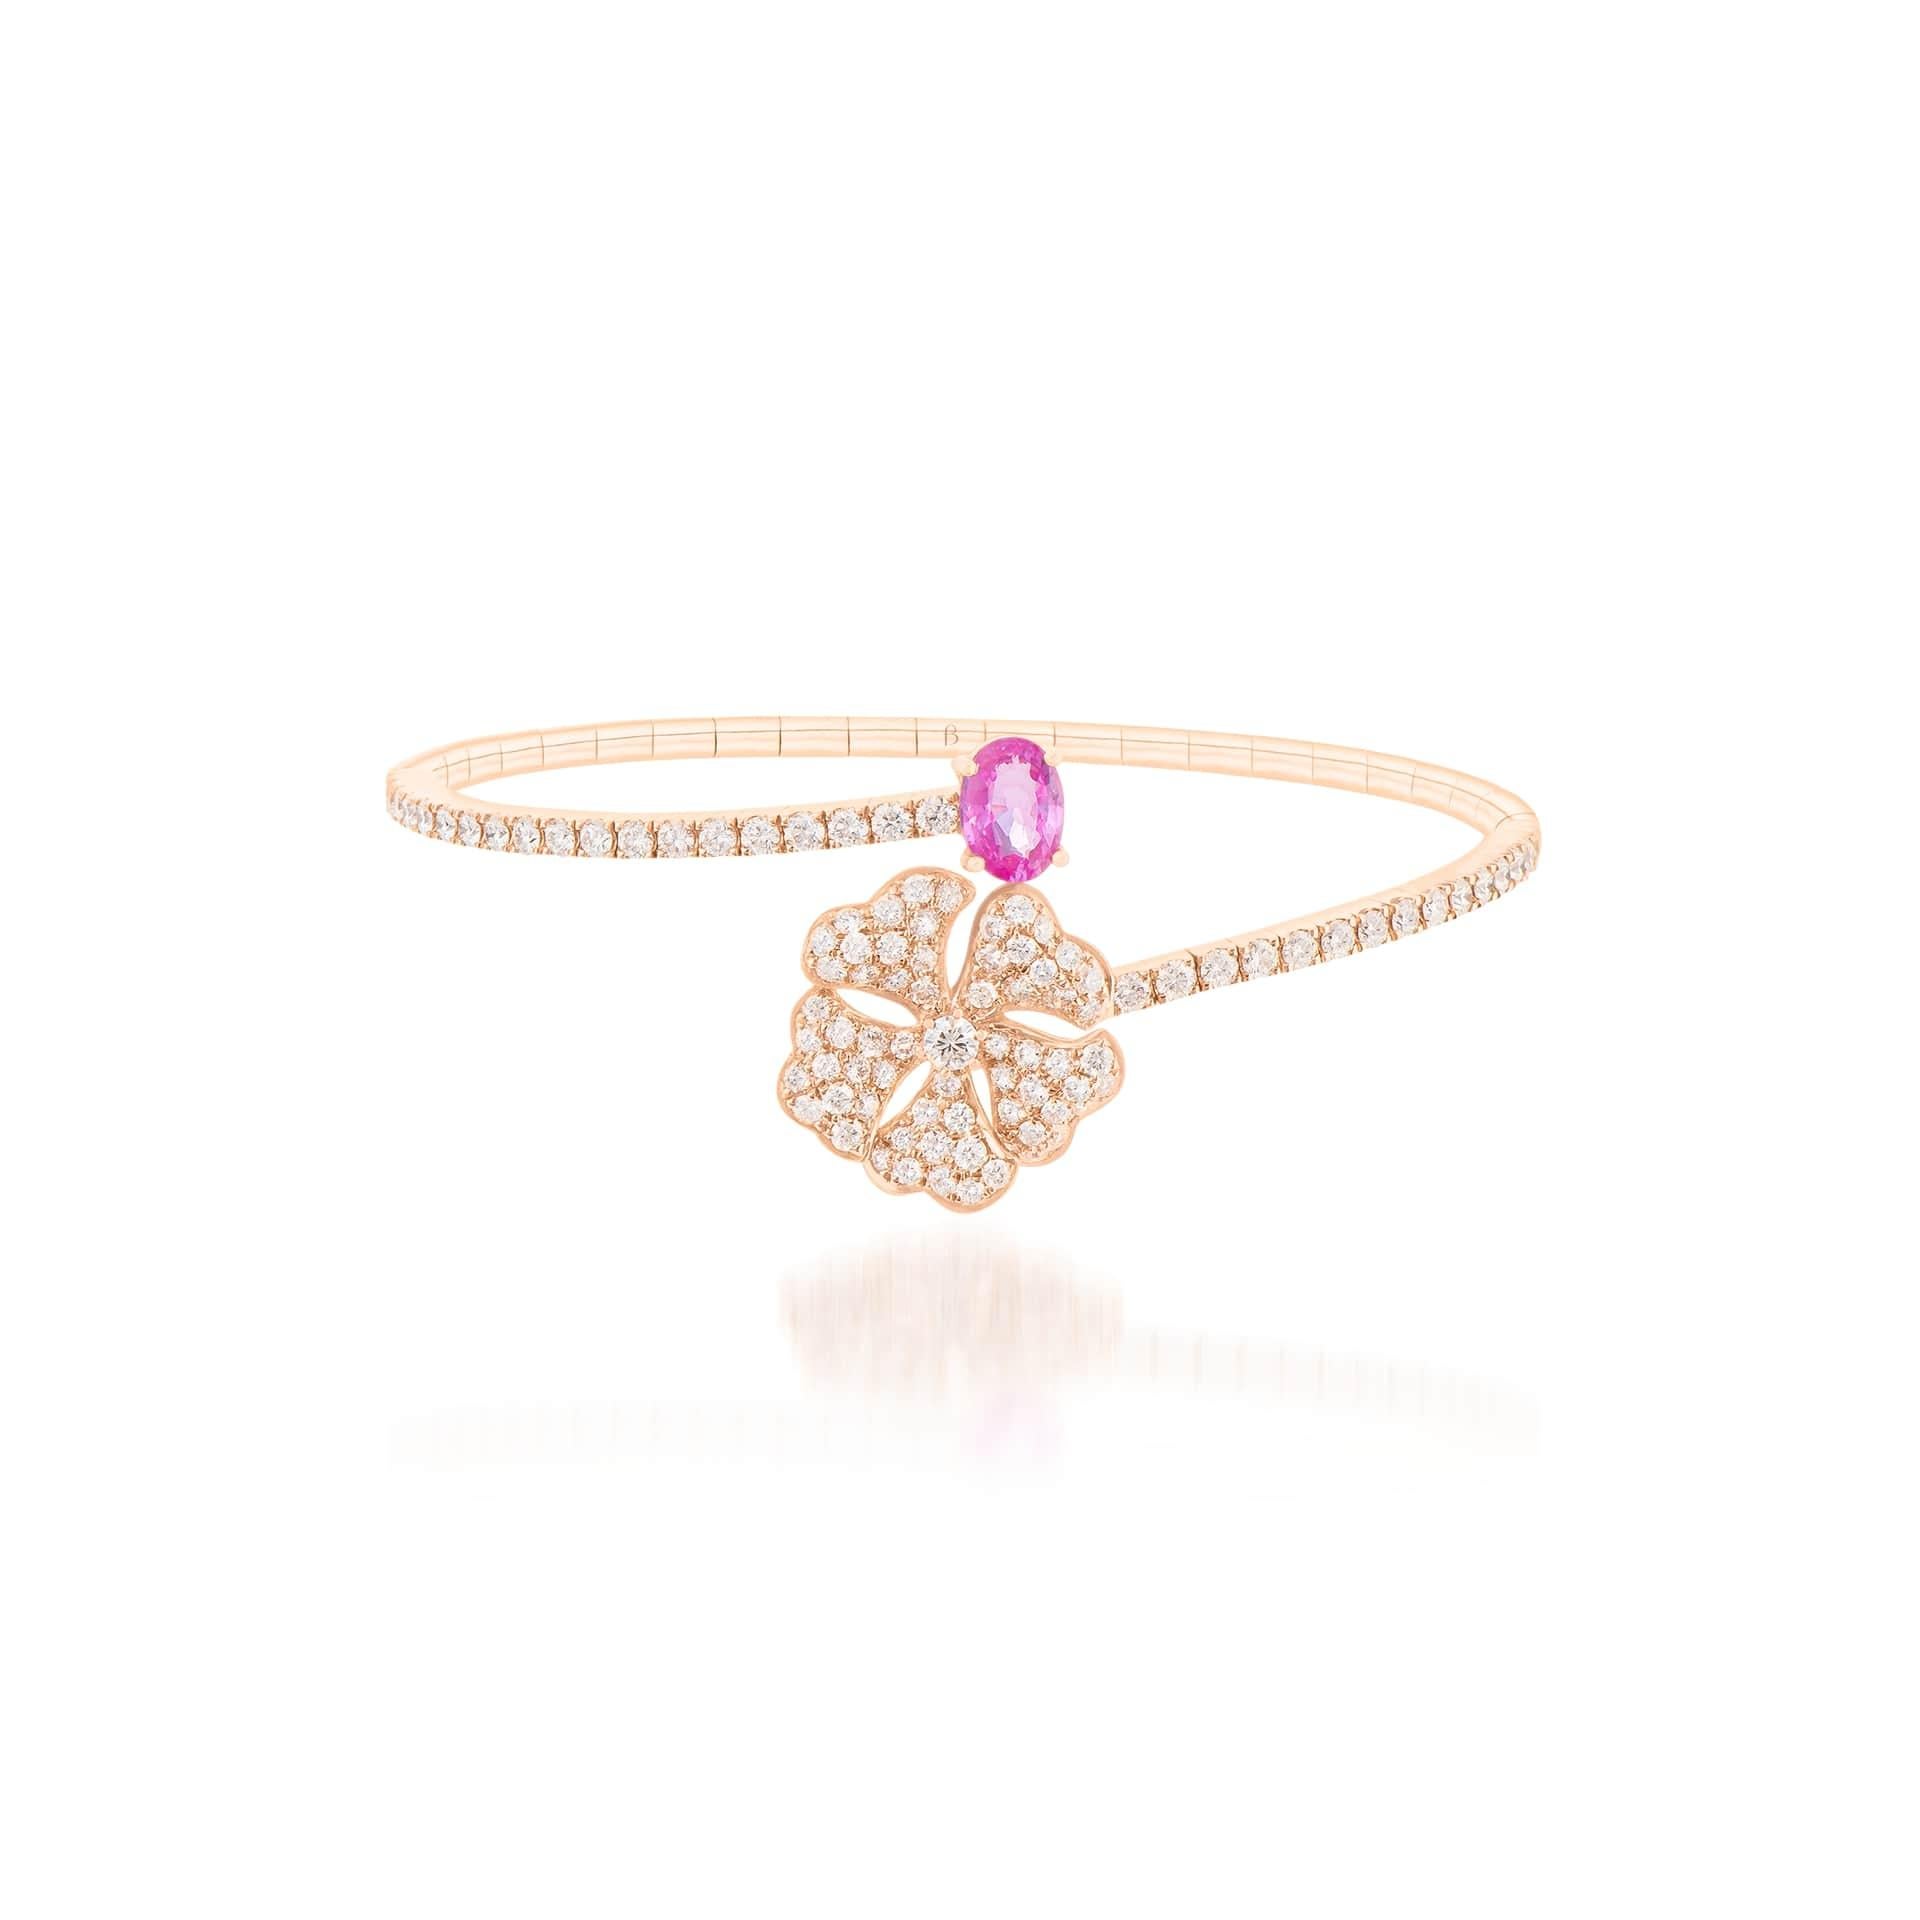 Bloom Pink Sapphire and Diamond Open Spiral Bangle in 18K Rose Gold

Inspired by the exquisite petals of the alpine cinquefoil flower, the Bloom collection combines the richness of diamonds and precious metals with the light versatility of this